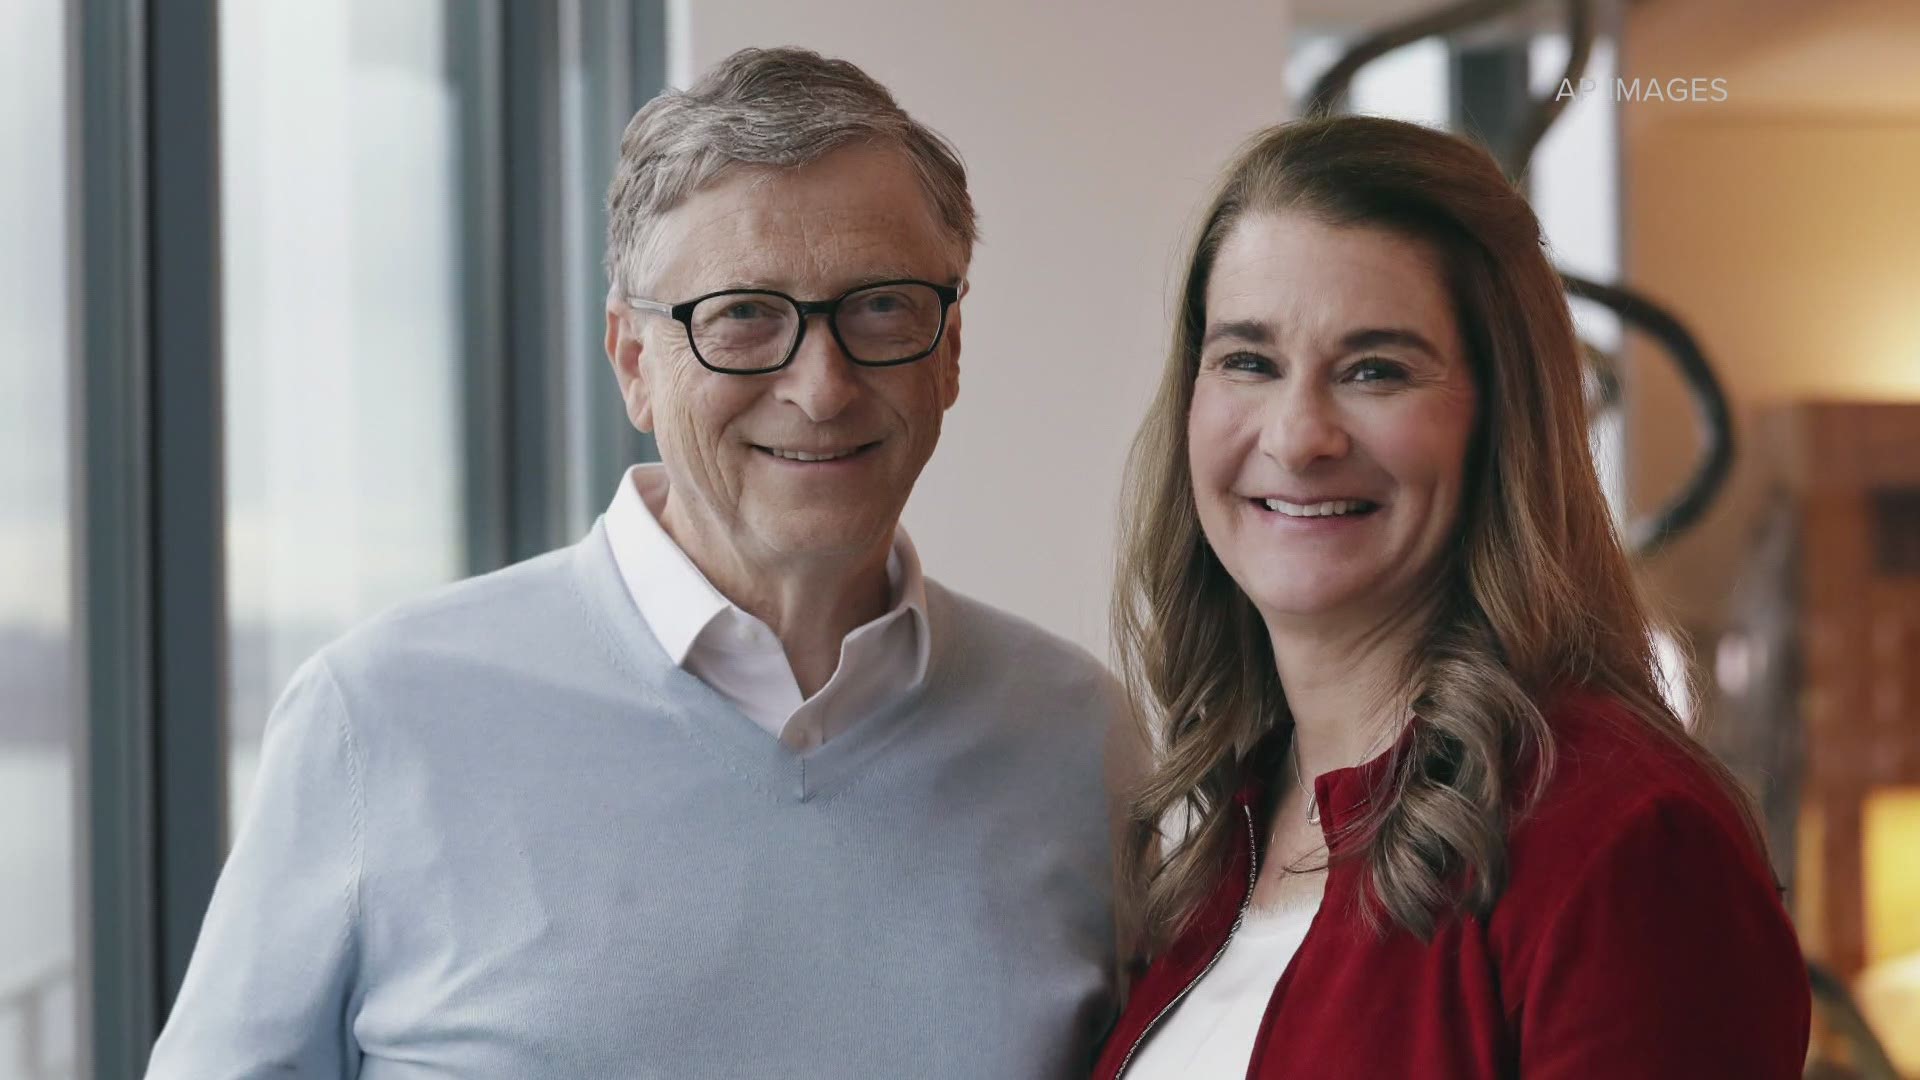 After 27 years of marriage, Bill and Melinda Gates will get a divorce, the couple jointly announced over Twitter Monday.